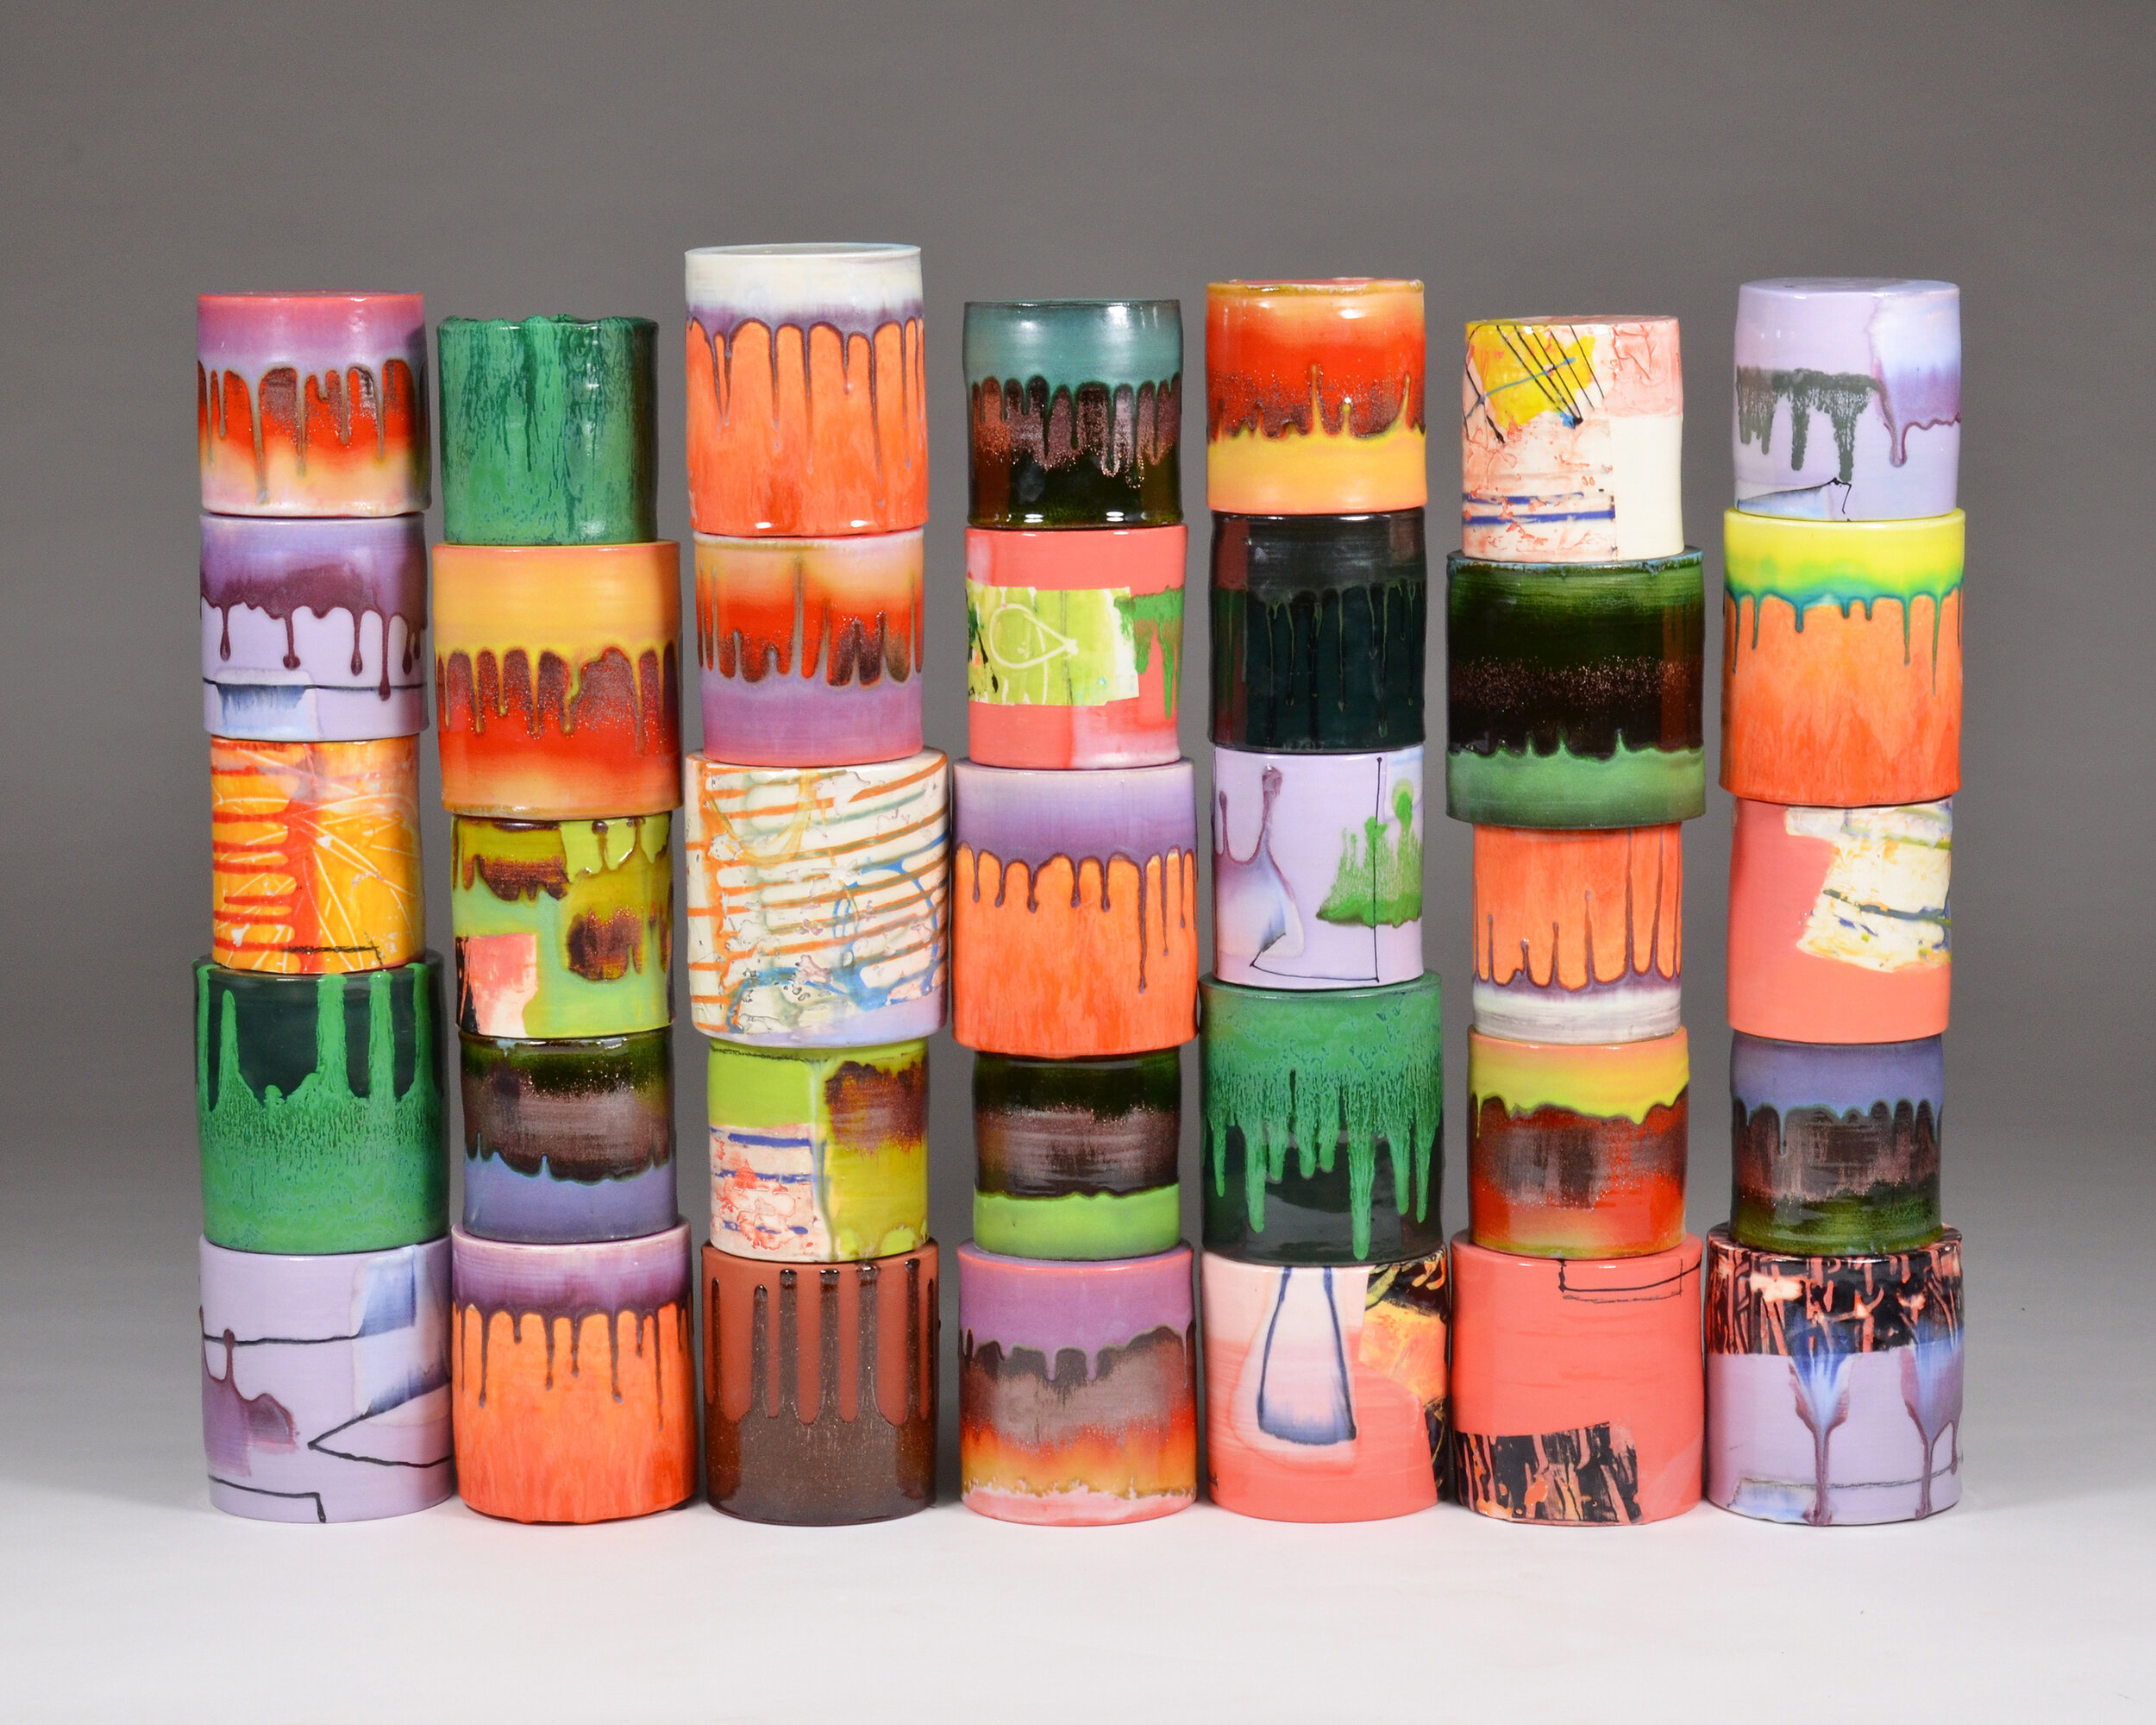 COMPOSITION OF ENCLOSED CYLINDERS | 24 x 38 x 6 inches / 61 x 96.5 x 15 cm, ceramic, glaze, 2017